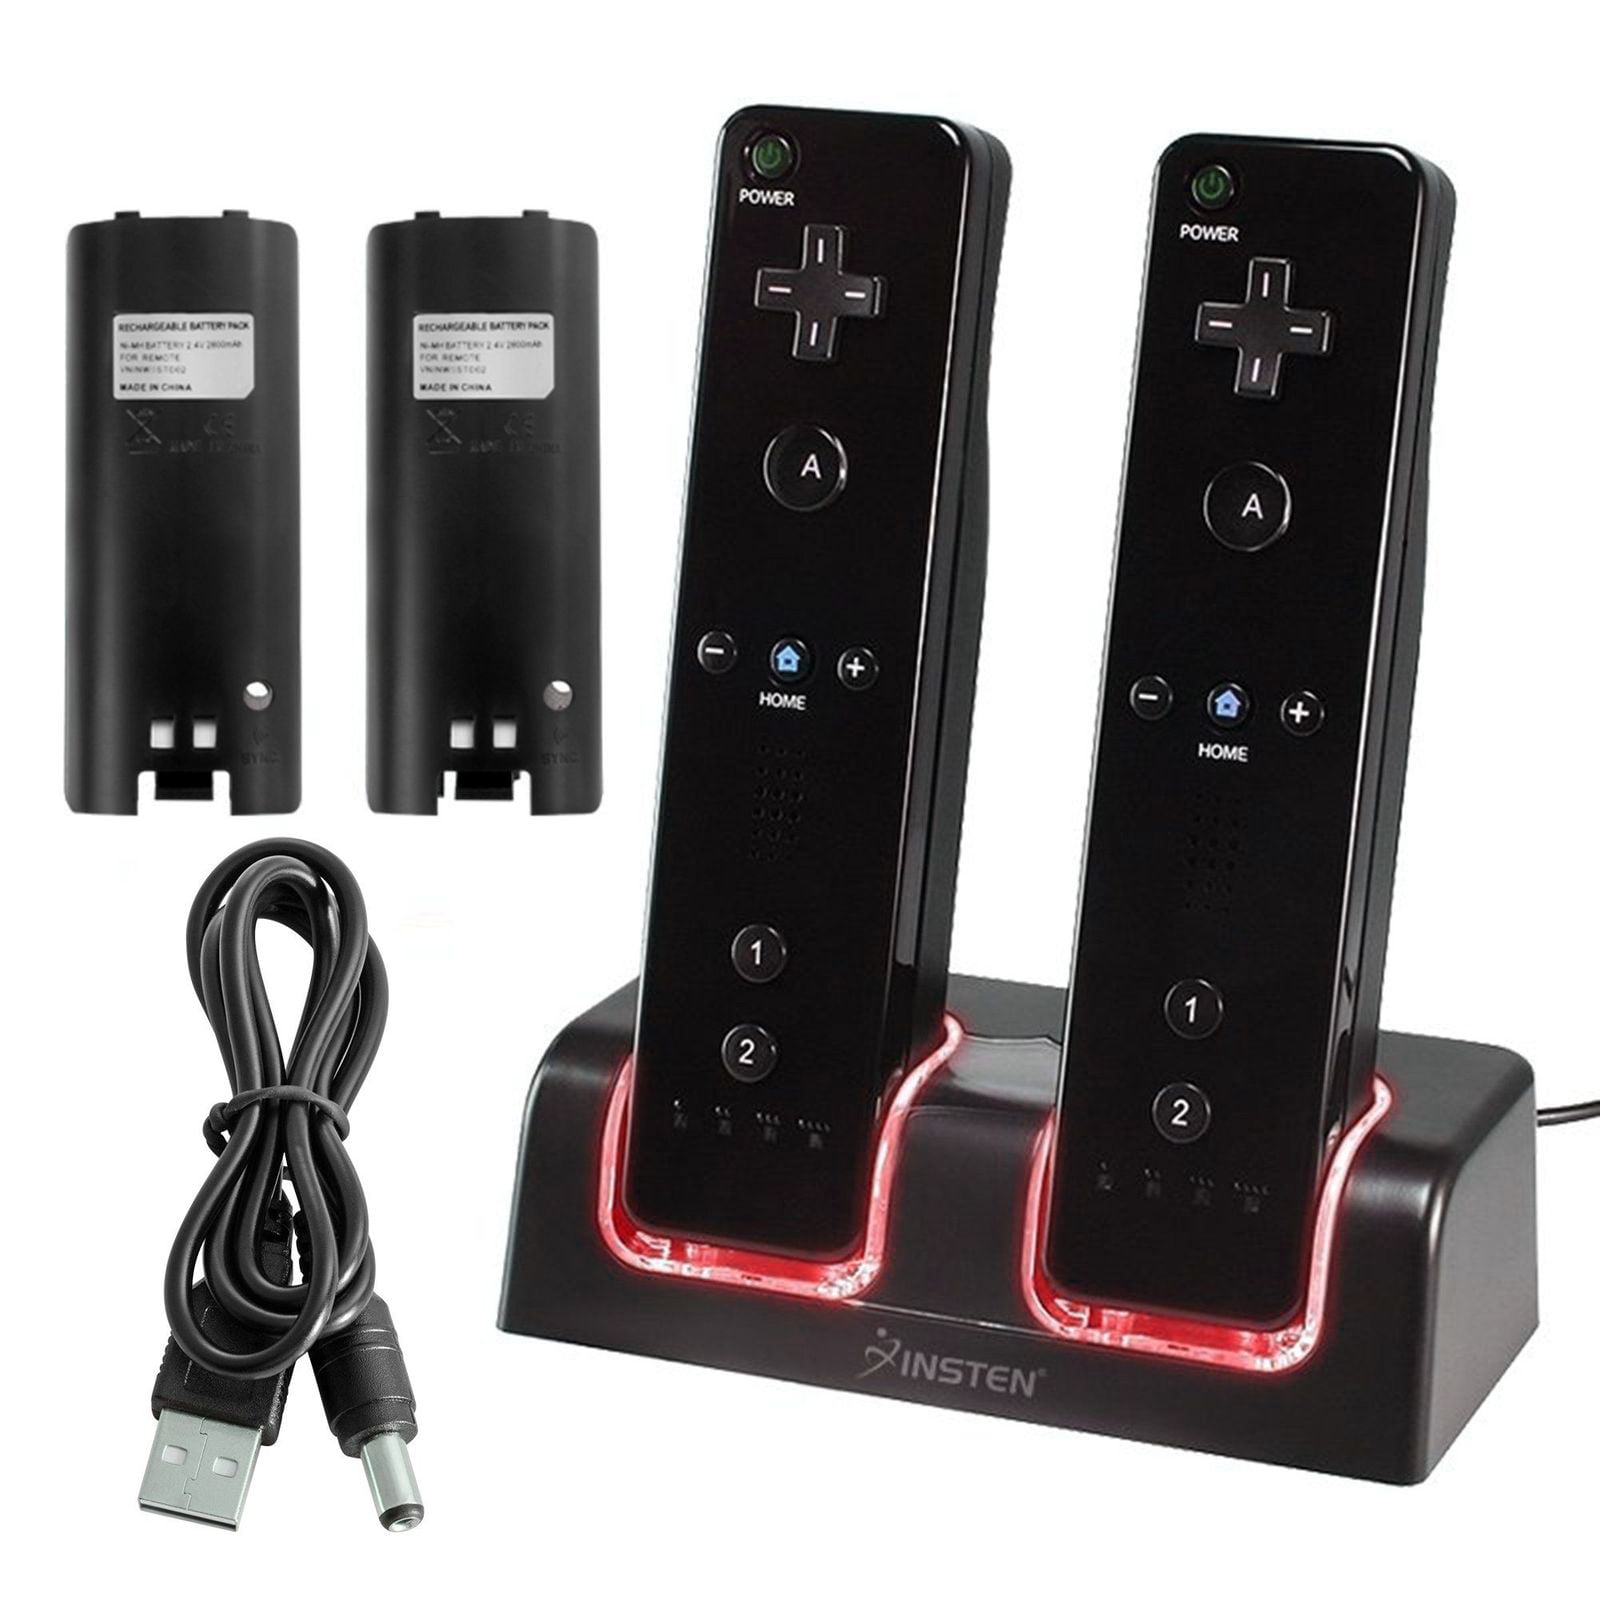 For Nintedo Wii Dual Remote Controller Charger Charging Dock Station + 2x Rechargeable Replacement Battery Pack Accessories Bundle for Wii / Wii U Controllers by Insten, - Walmart.com